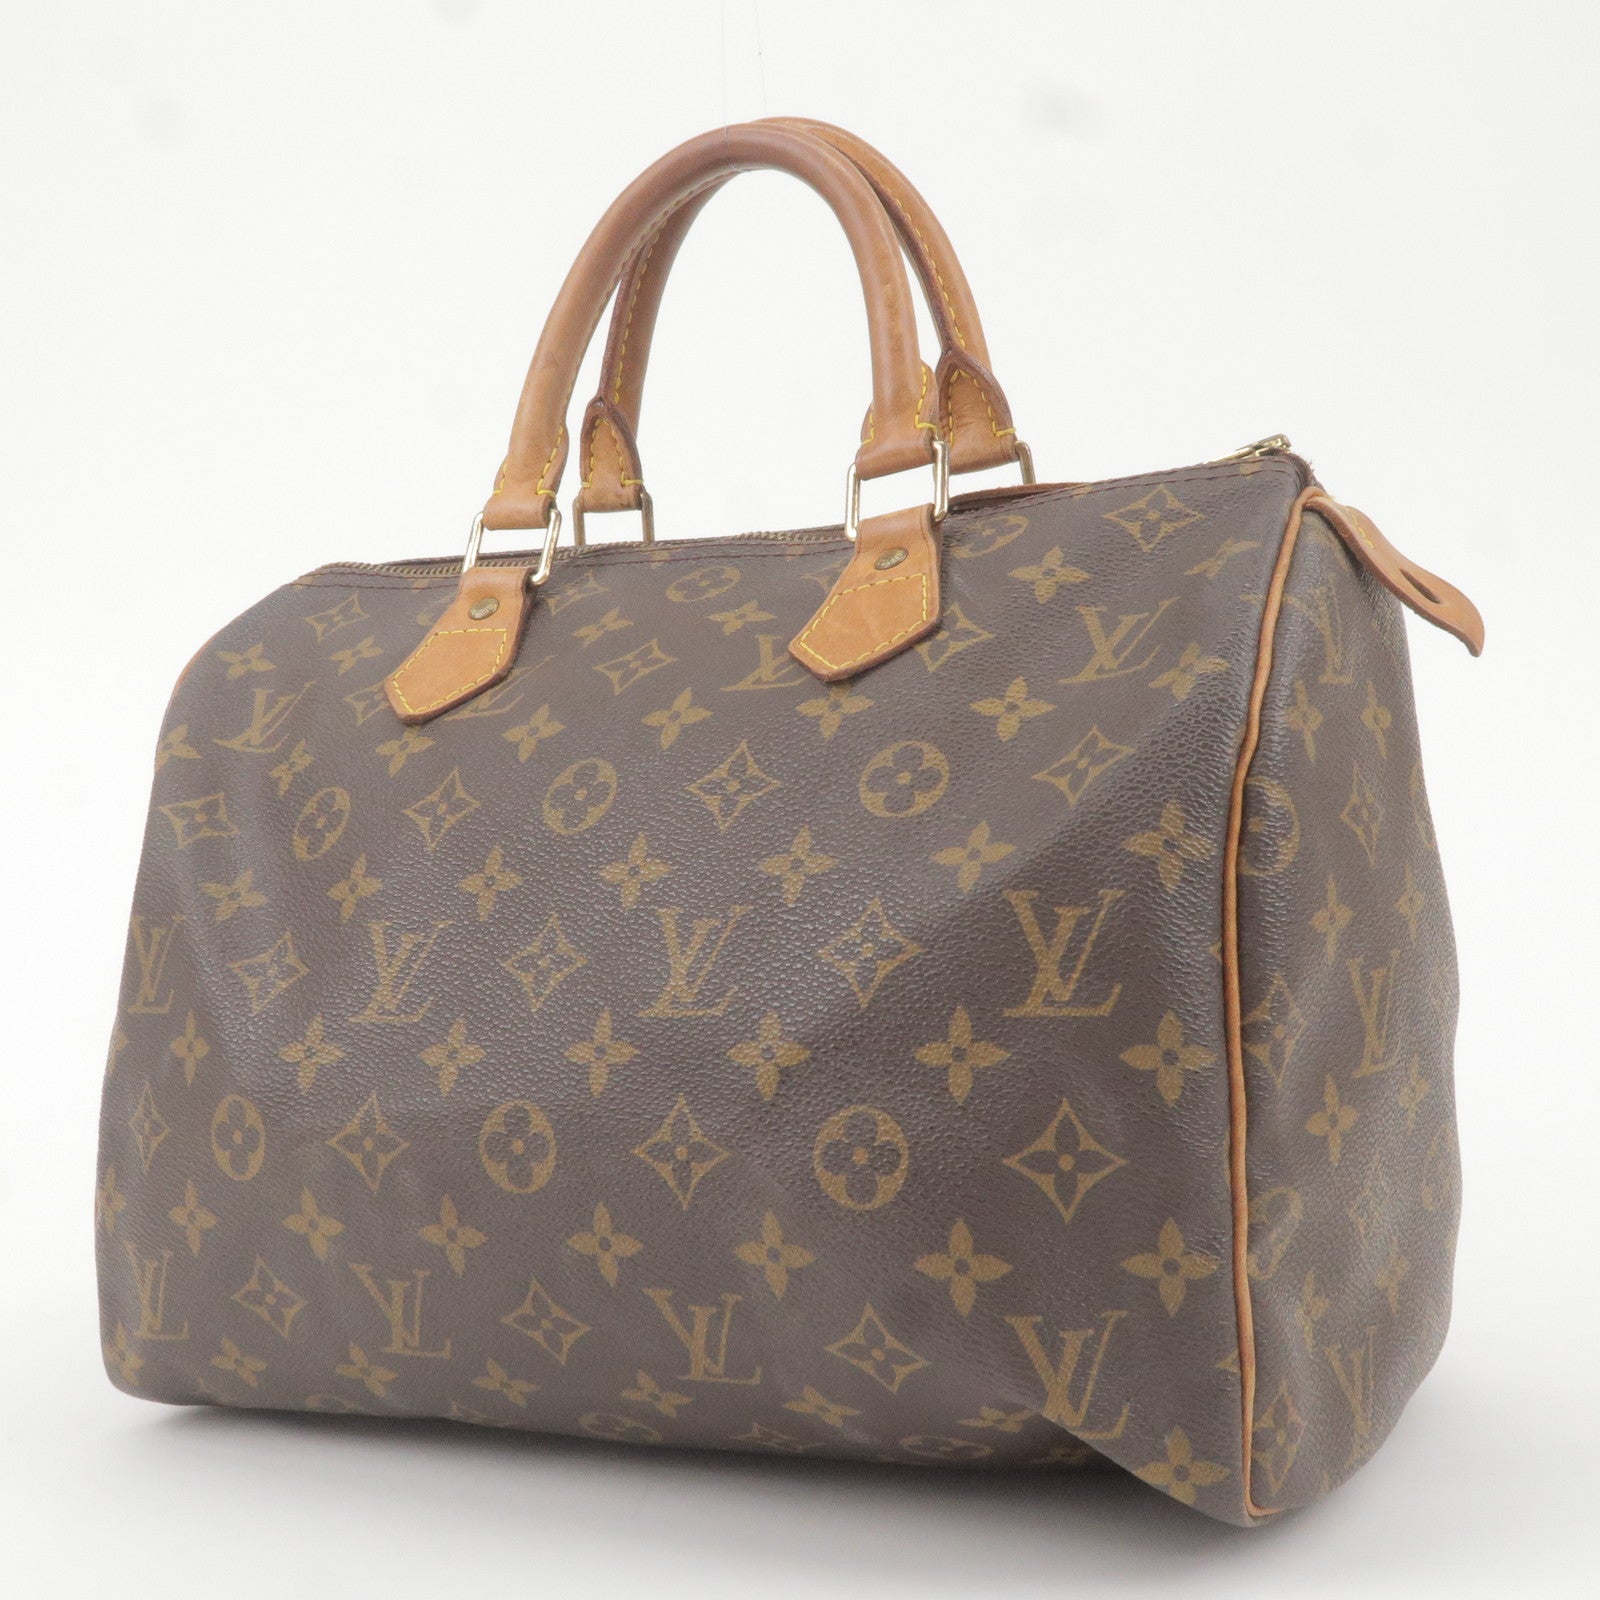 armand backpack louis vuitton